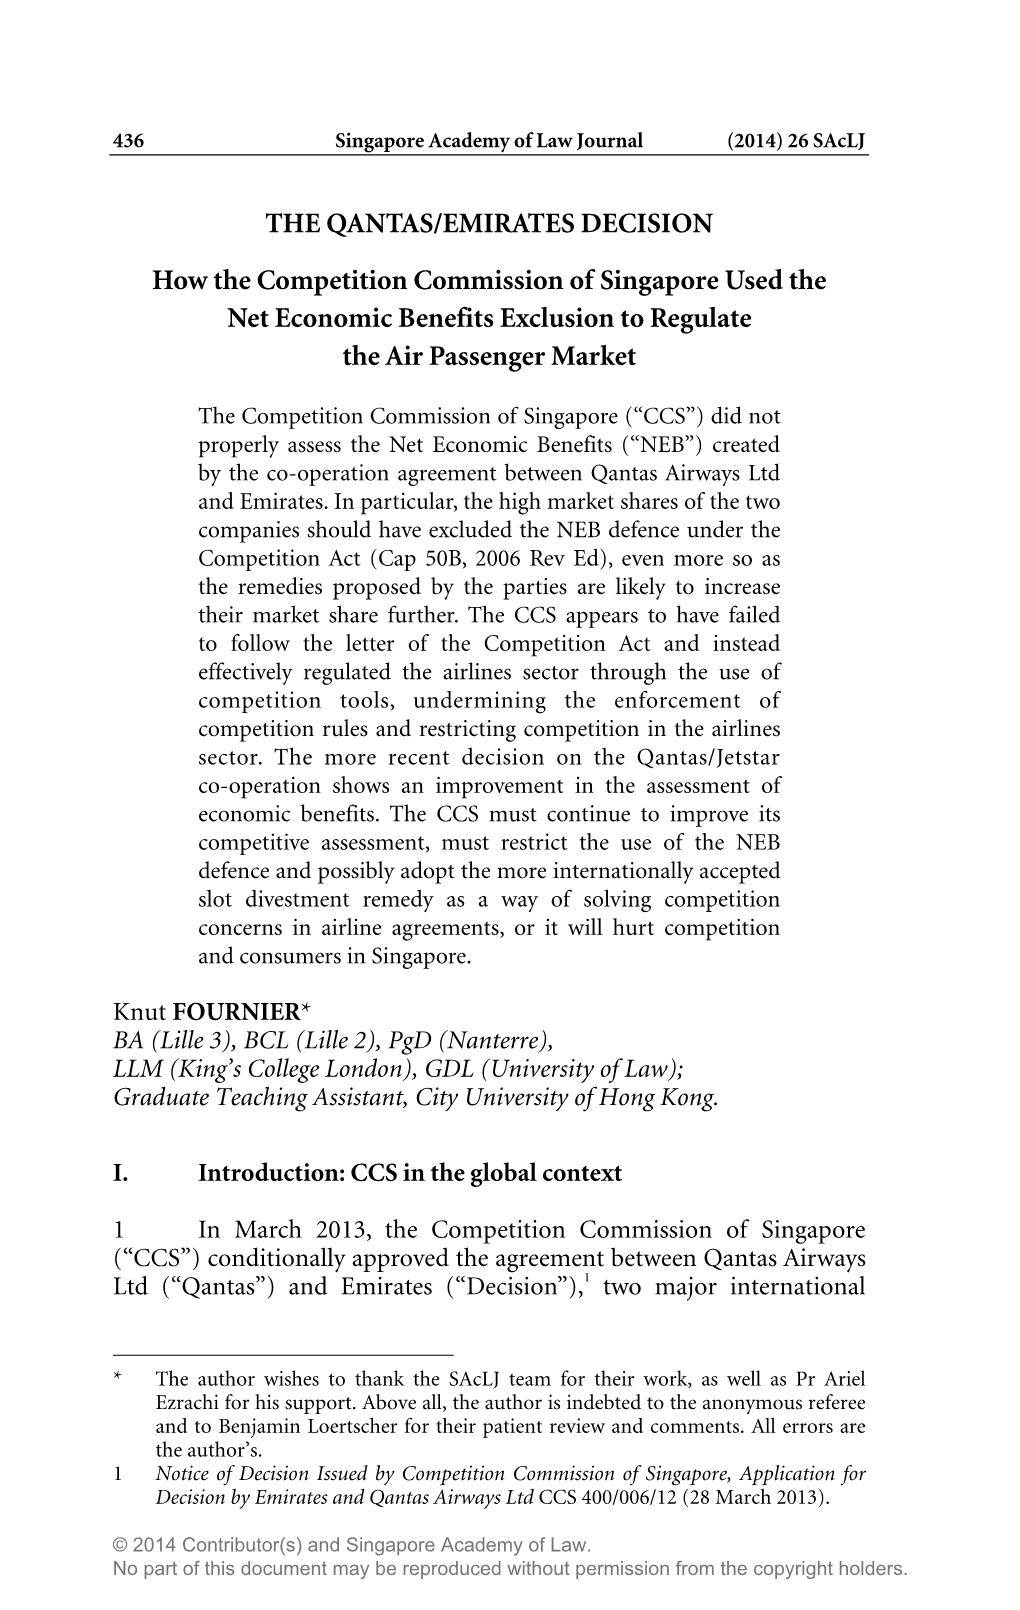 THE QANTAS/EMIRATES DECISION How the Competition Commission of Singapore Used the Net Economic Benefits Exclusion to Regulate the Air Passenger Market